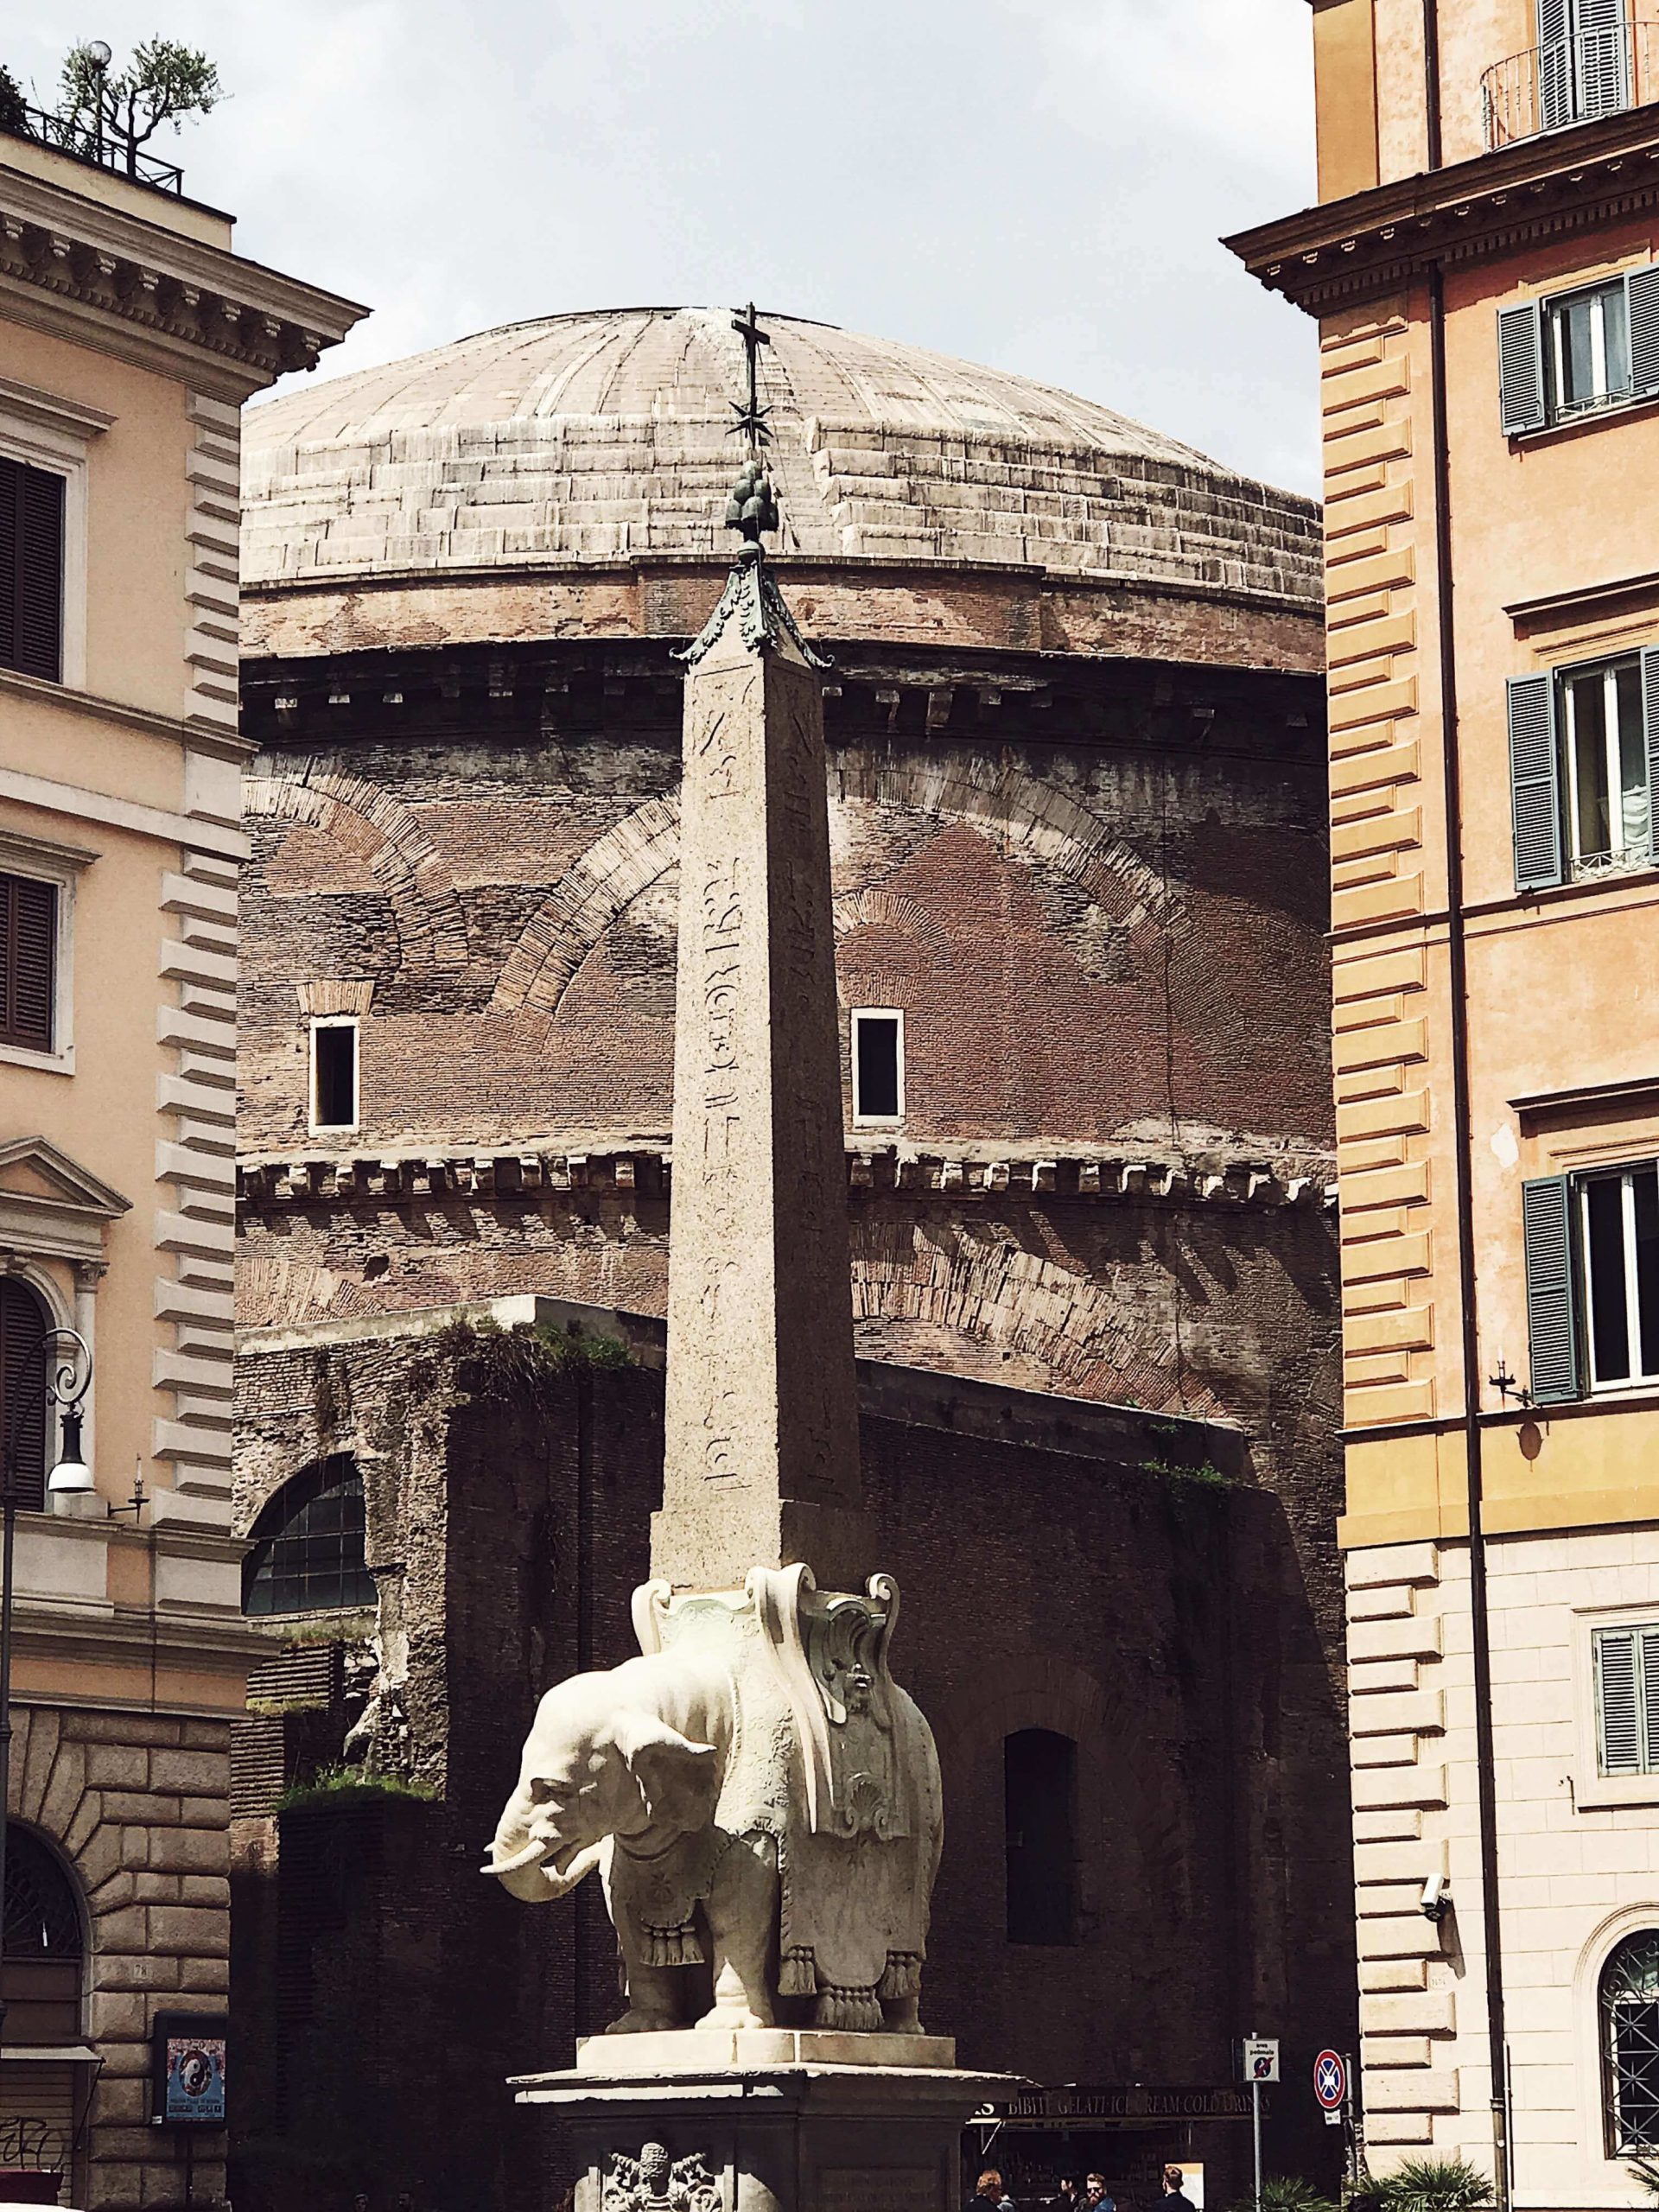 Rome in pictures: the elephant in piazza minerva